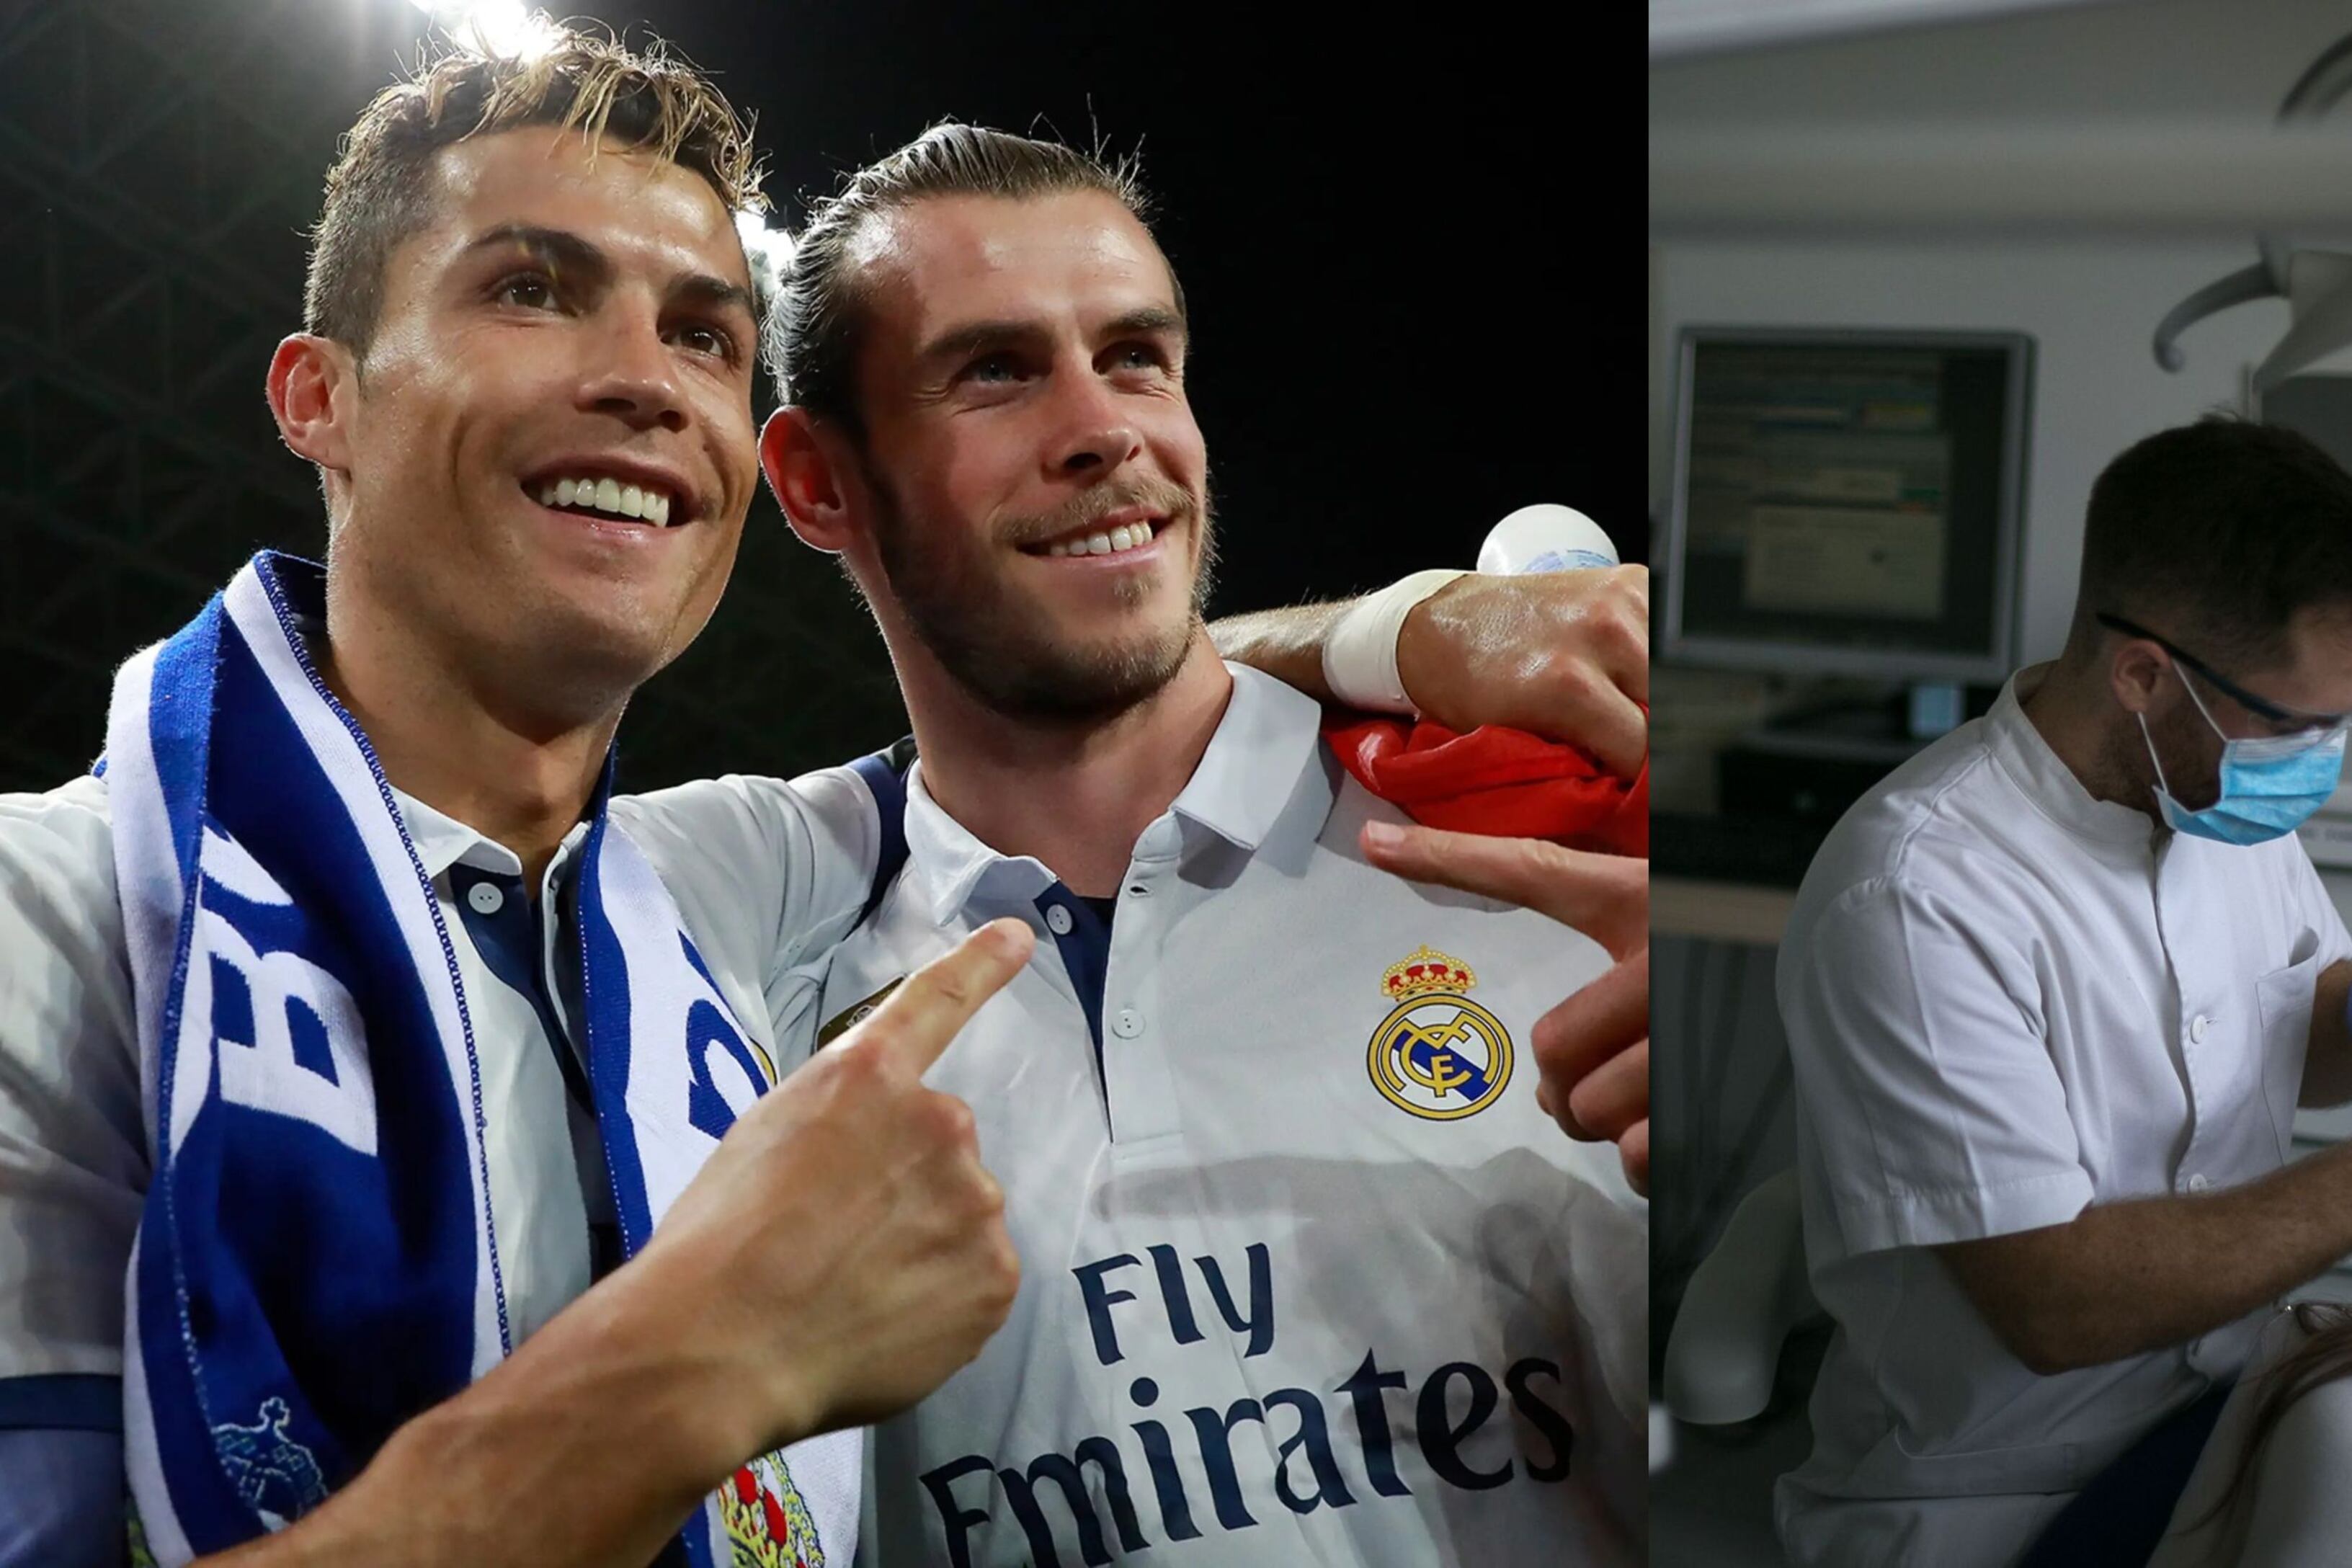 He shone at Real Madrid, he was the best in the world, now he's a dentist to earn money